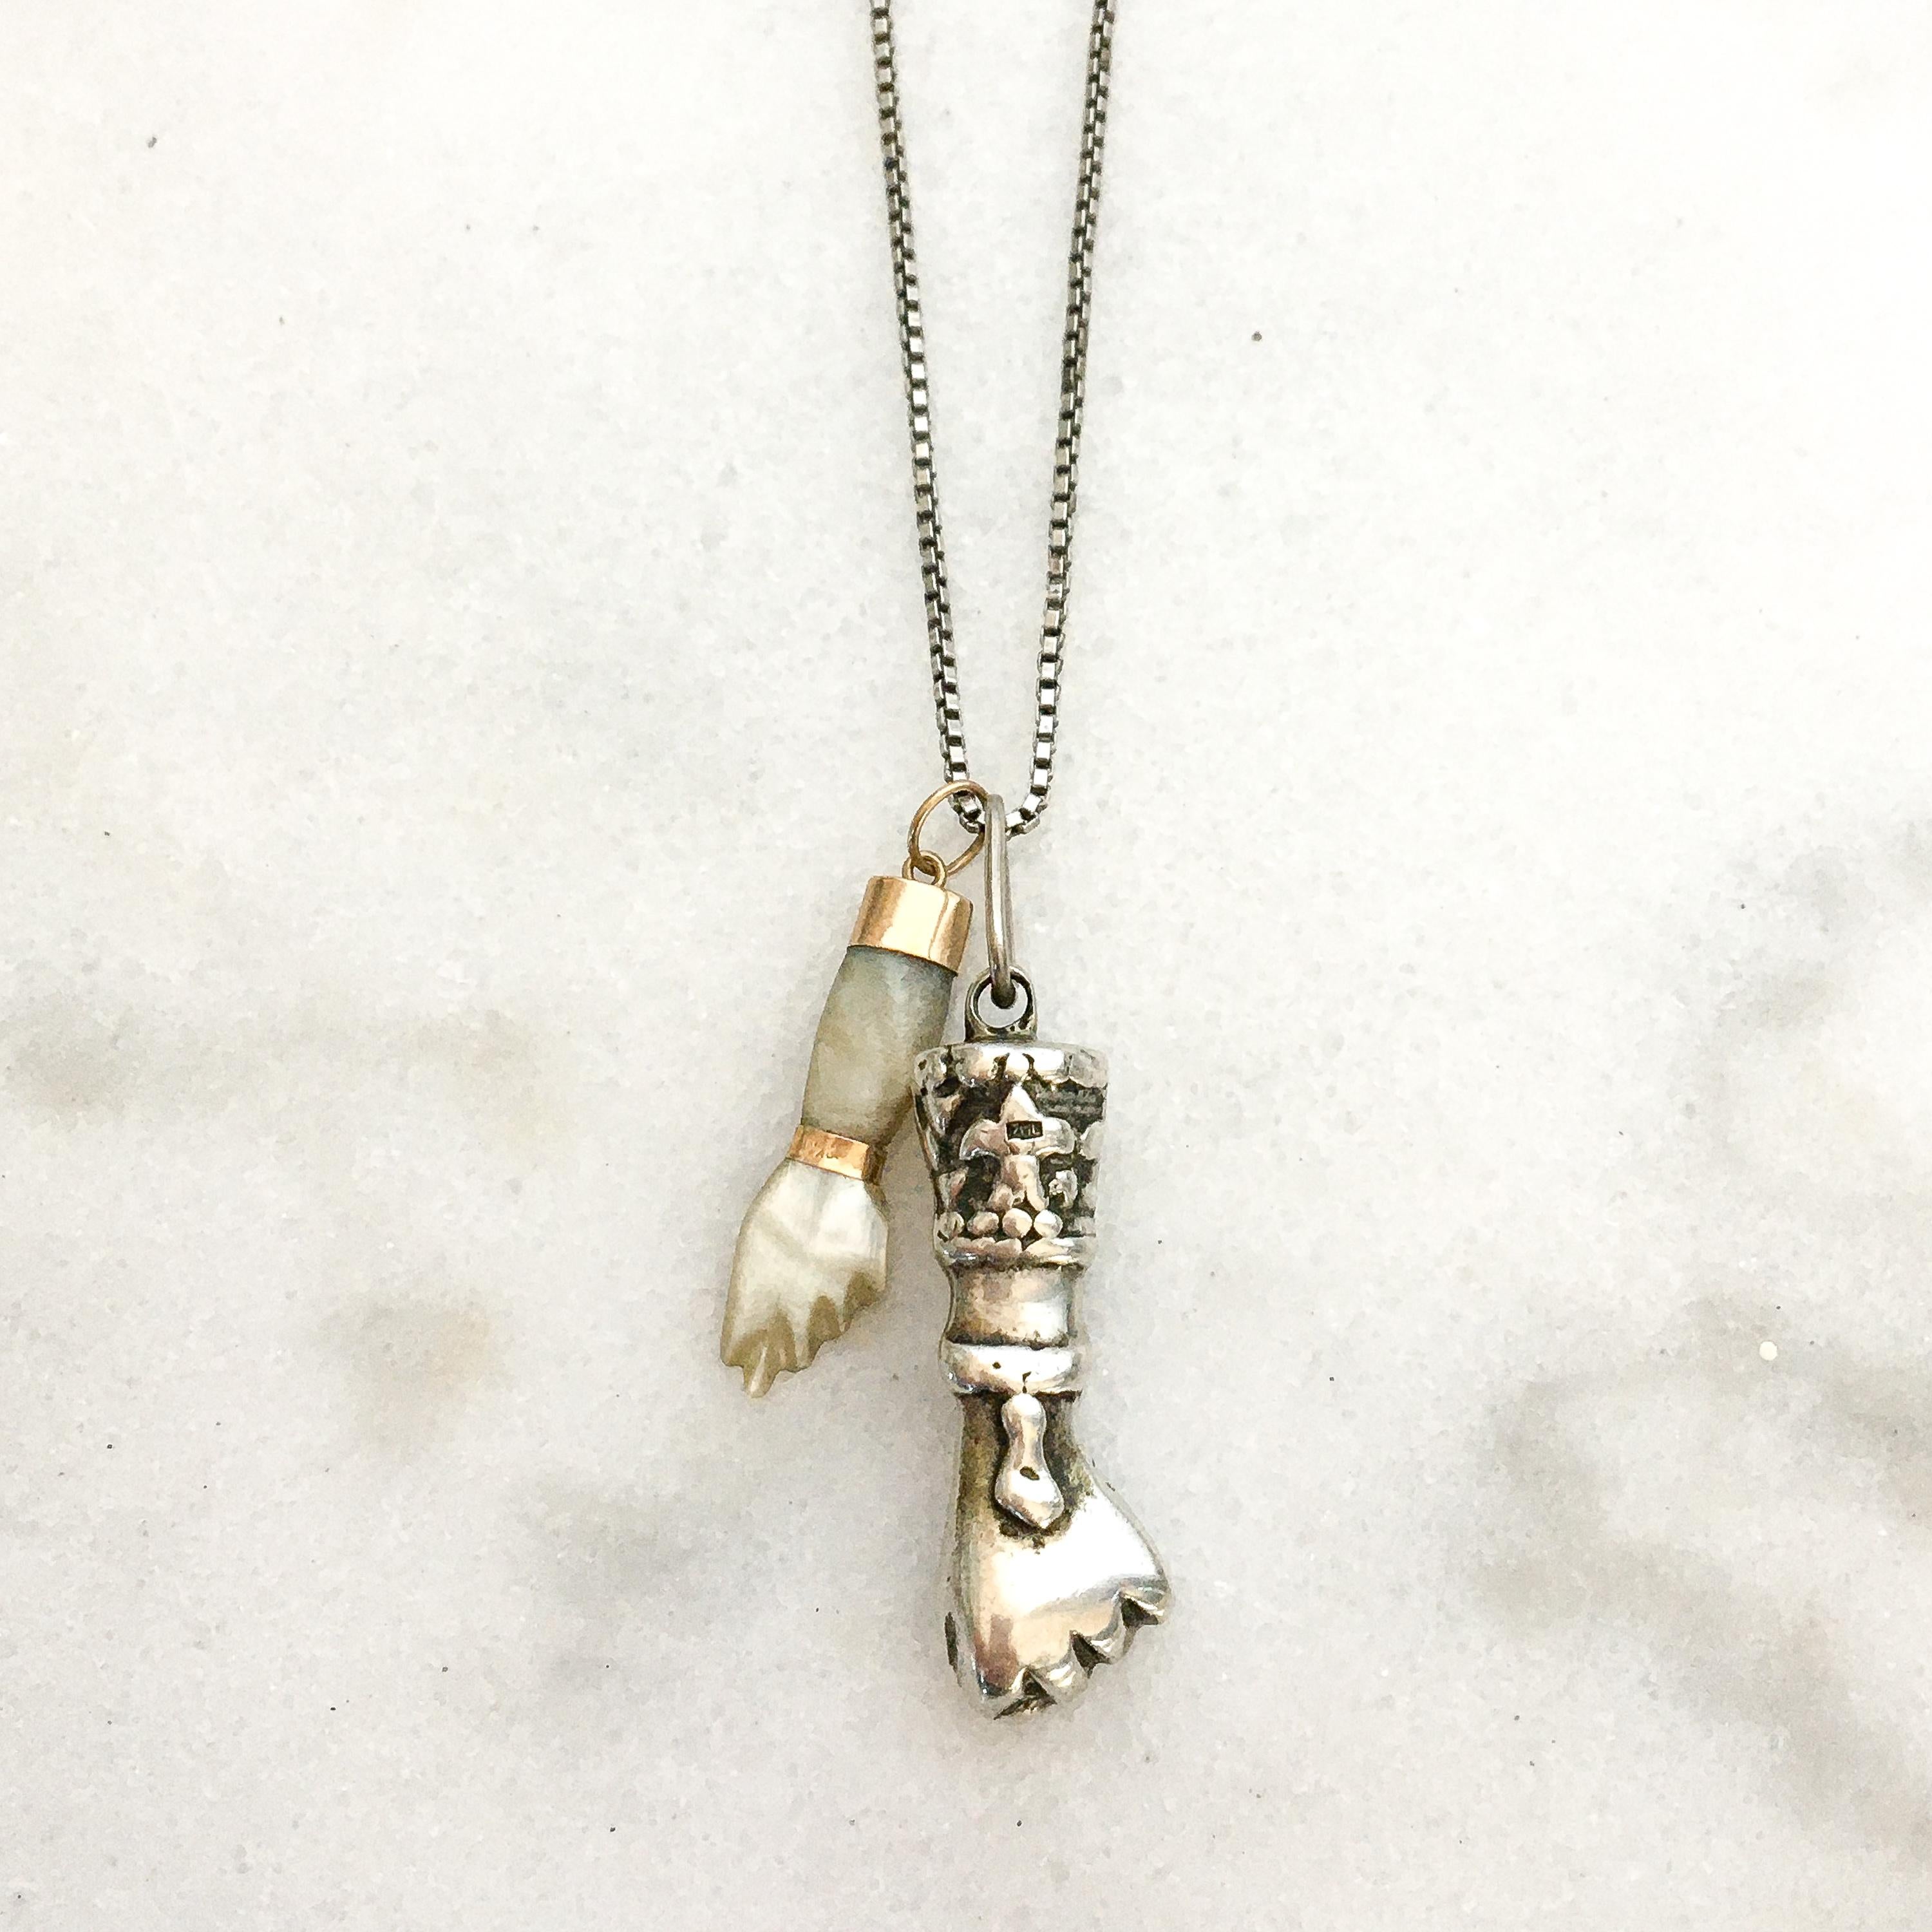 A vintage mid-century figa good luck charm crafted in solid silver. The figa has nicely engraved details with a fleur-de-lis on the front and back of the sleeve. The charm is great worn alone or layered with your other favorite beauties. The charm